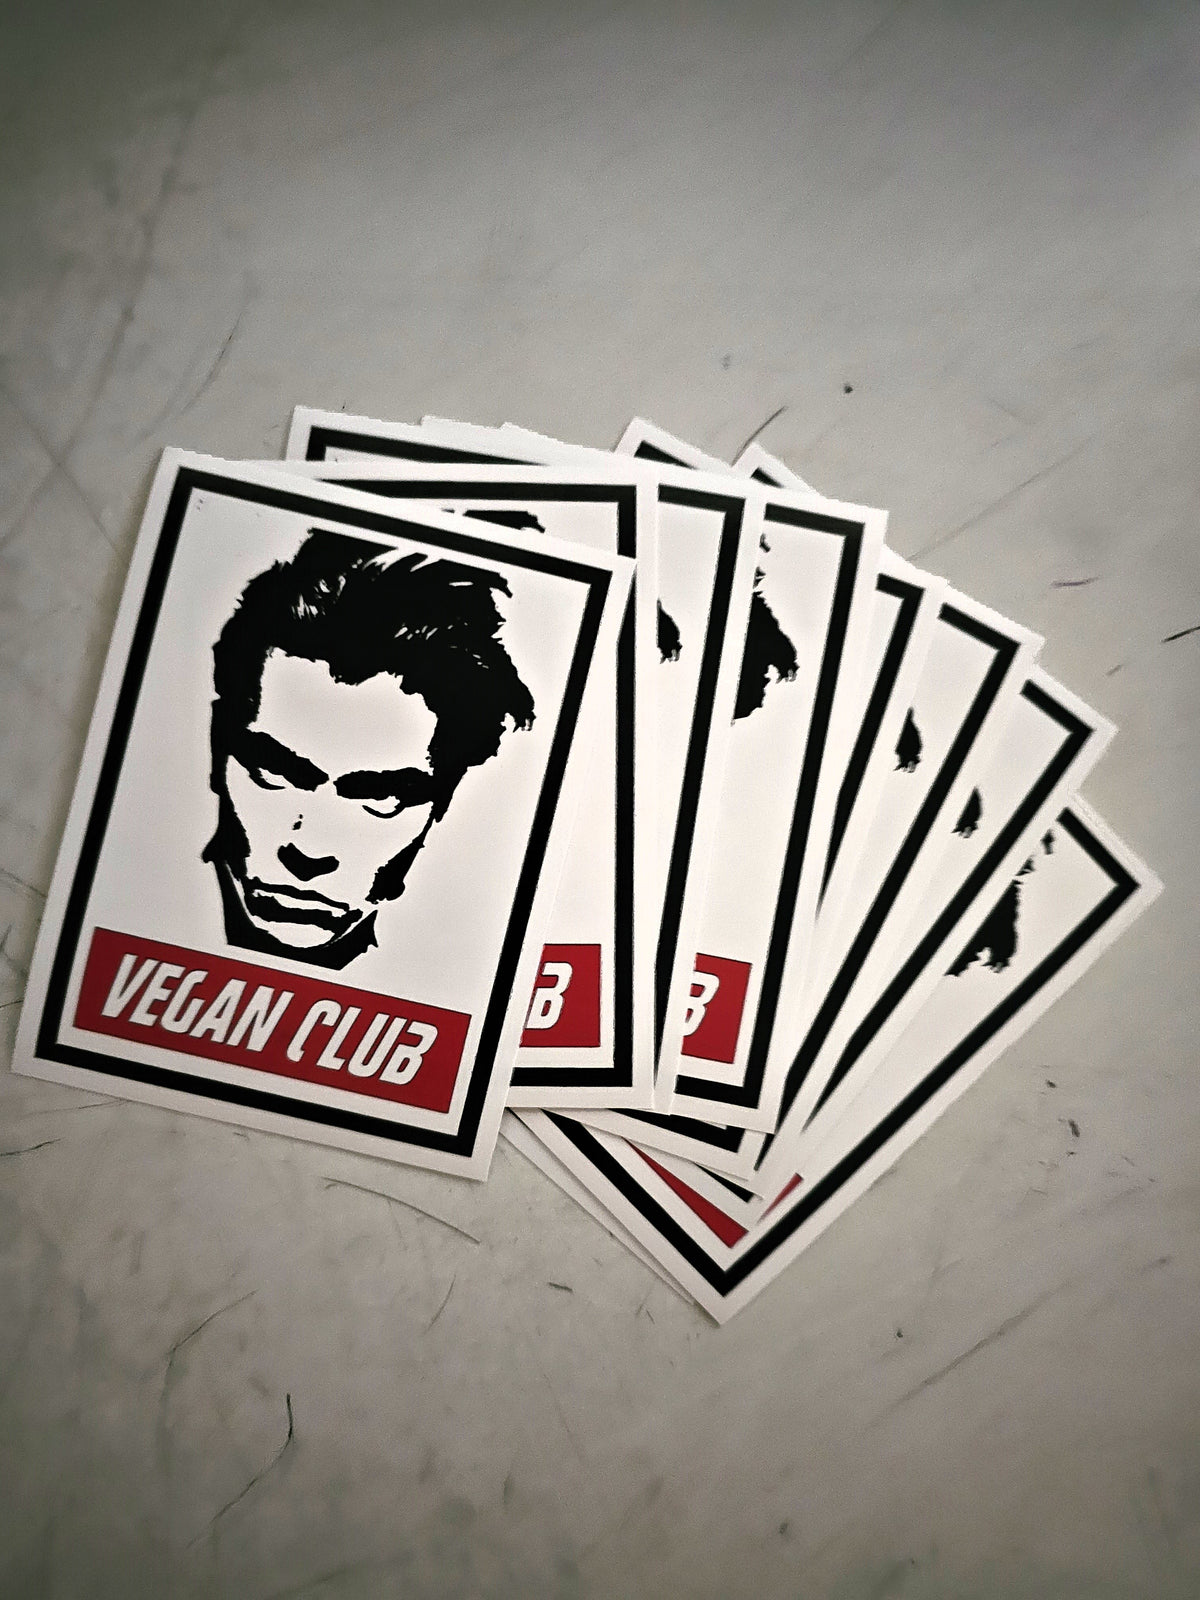 Spread the Word with 10 Vegan Club with River Phoenix Stickers